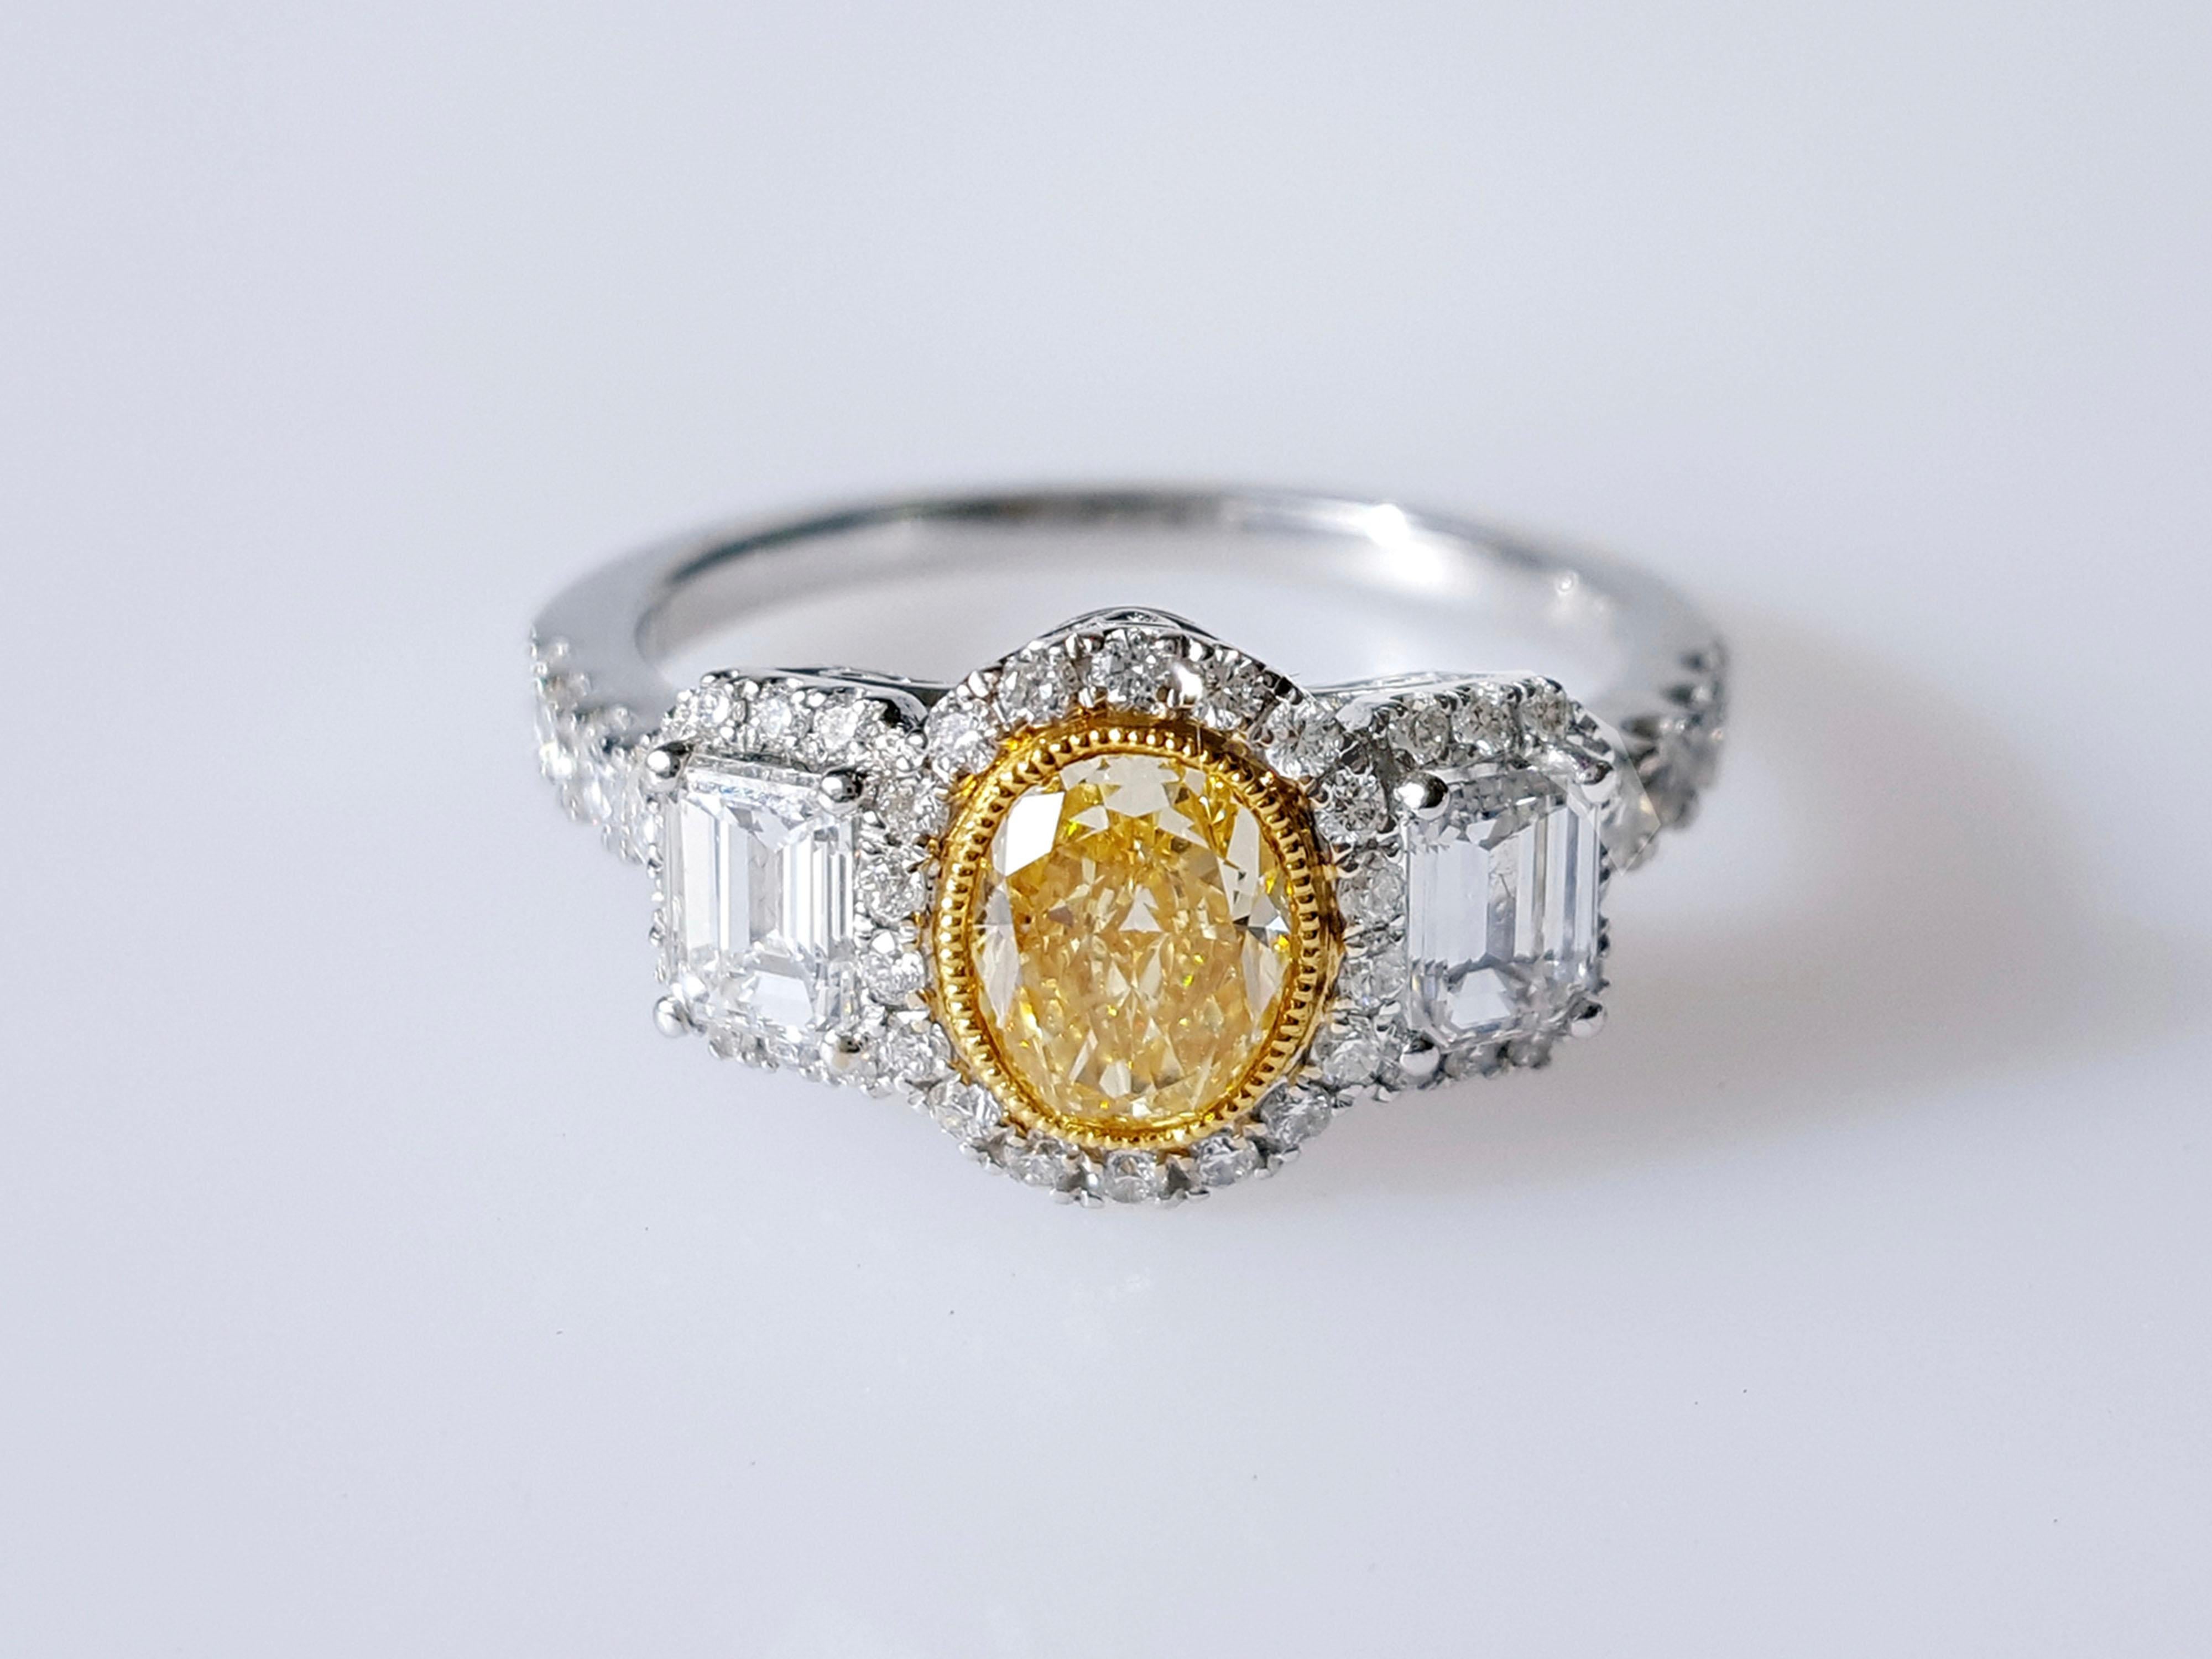 A stunning Three-Stones Engagement ring, 0.82 carat Yellow Oval-cut diamond. Flanked by two Emerald-cut diamonds total weight 0.58 carat. The classic design brings out the beauty of the center stone with the surrounding 46 round white diamonds 0.38